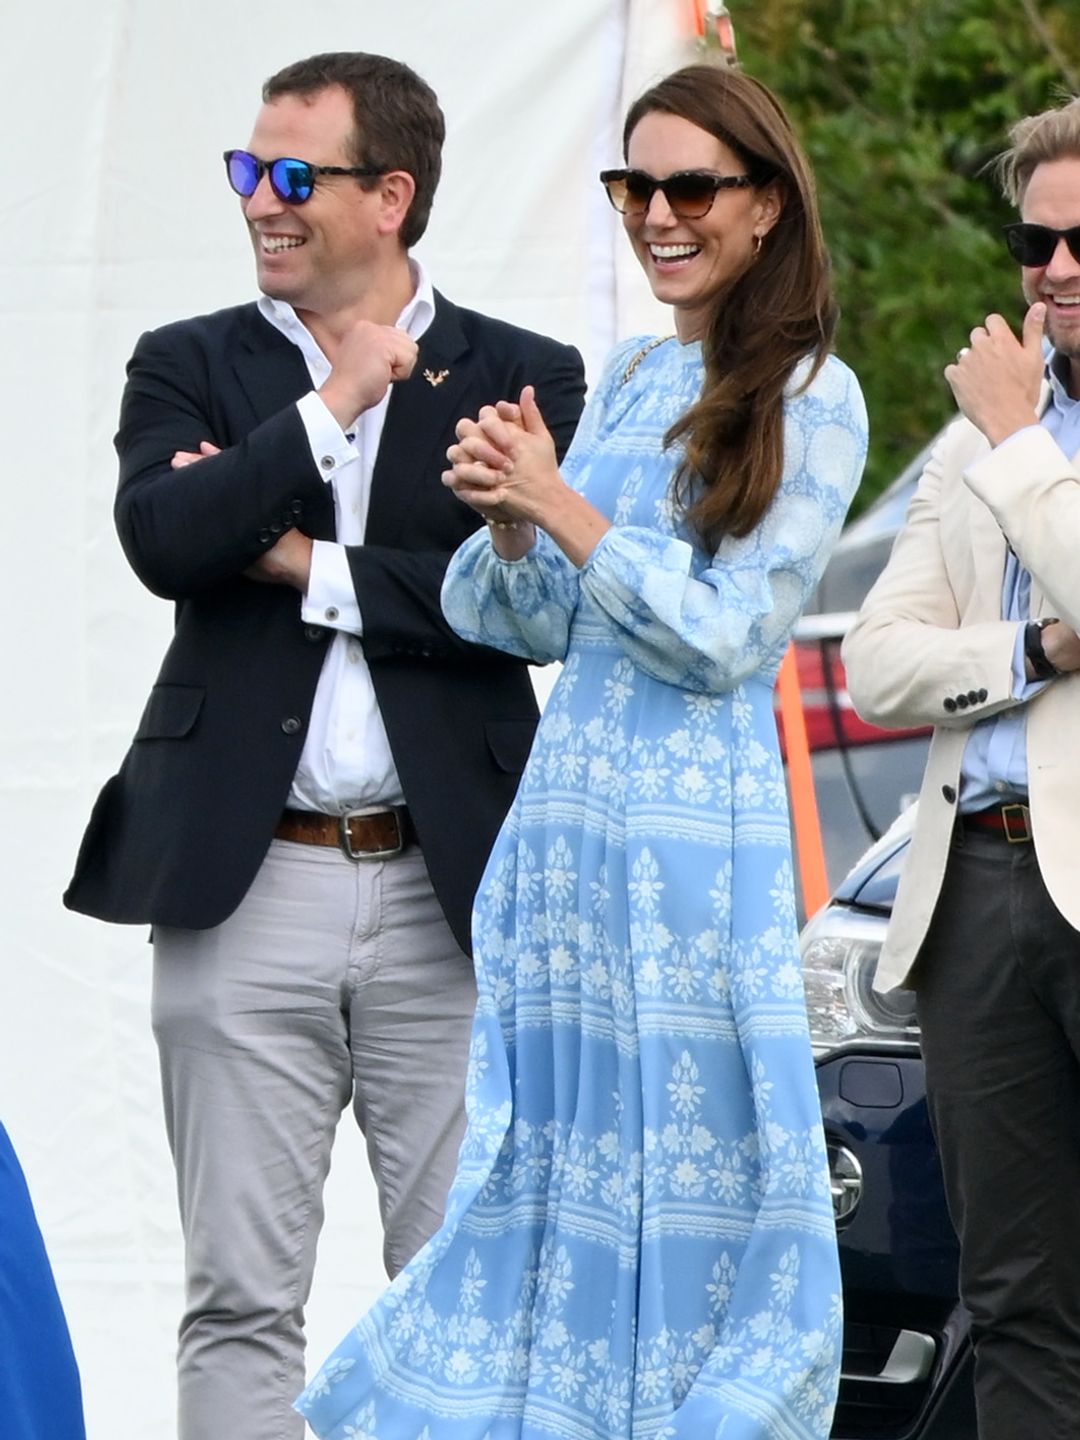 Peter Phillips and Kate Middleton at charity polo match